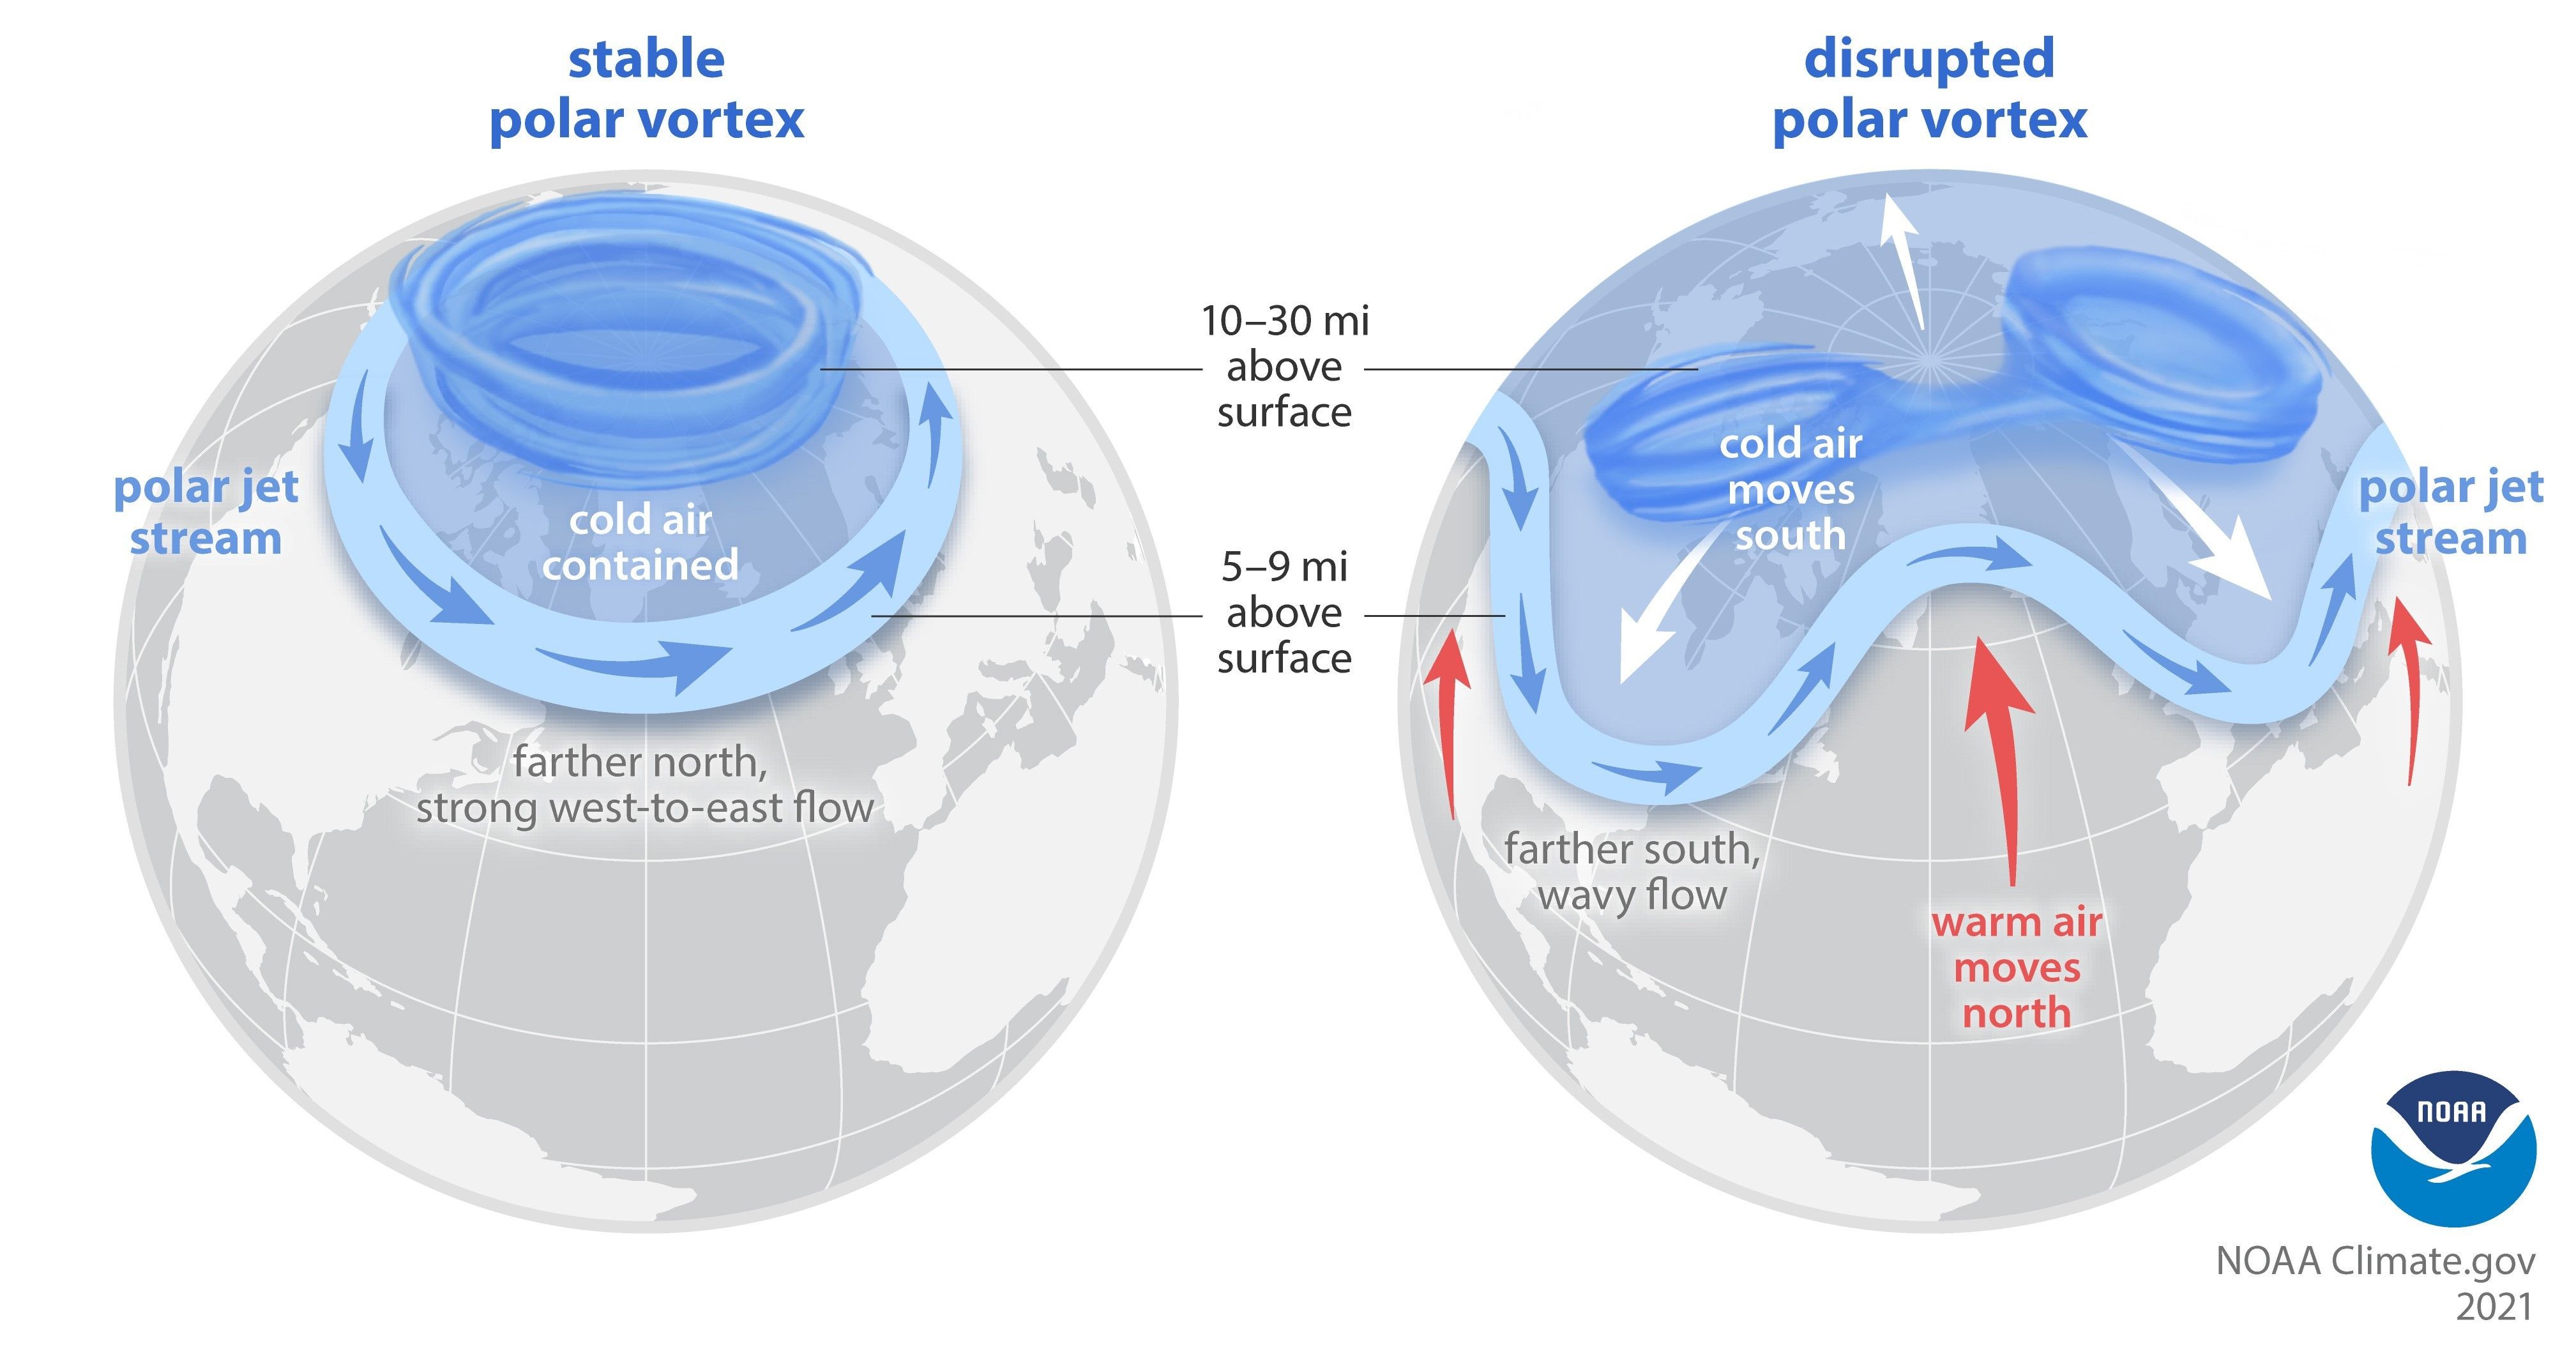 A Sudden Stratospheric Warming can split the polar vortex in the stratosphere in two (right image)(climate.gov)